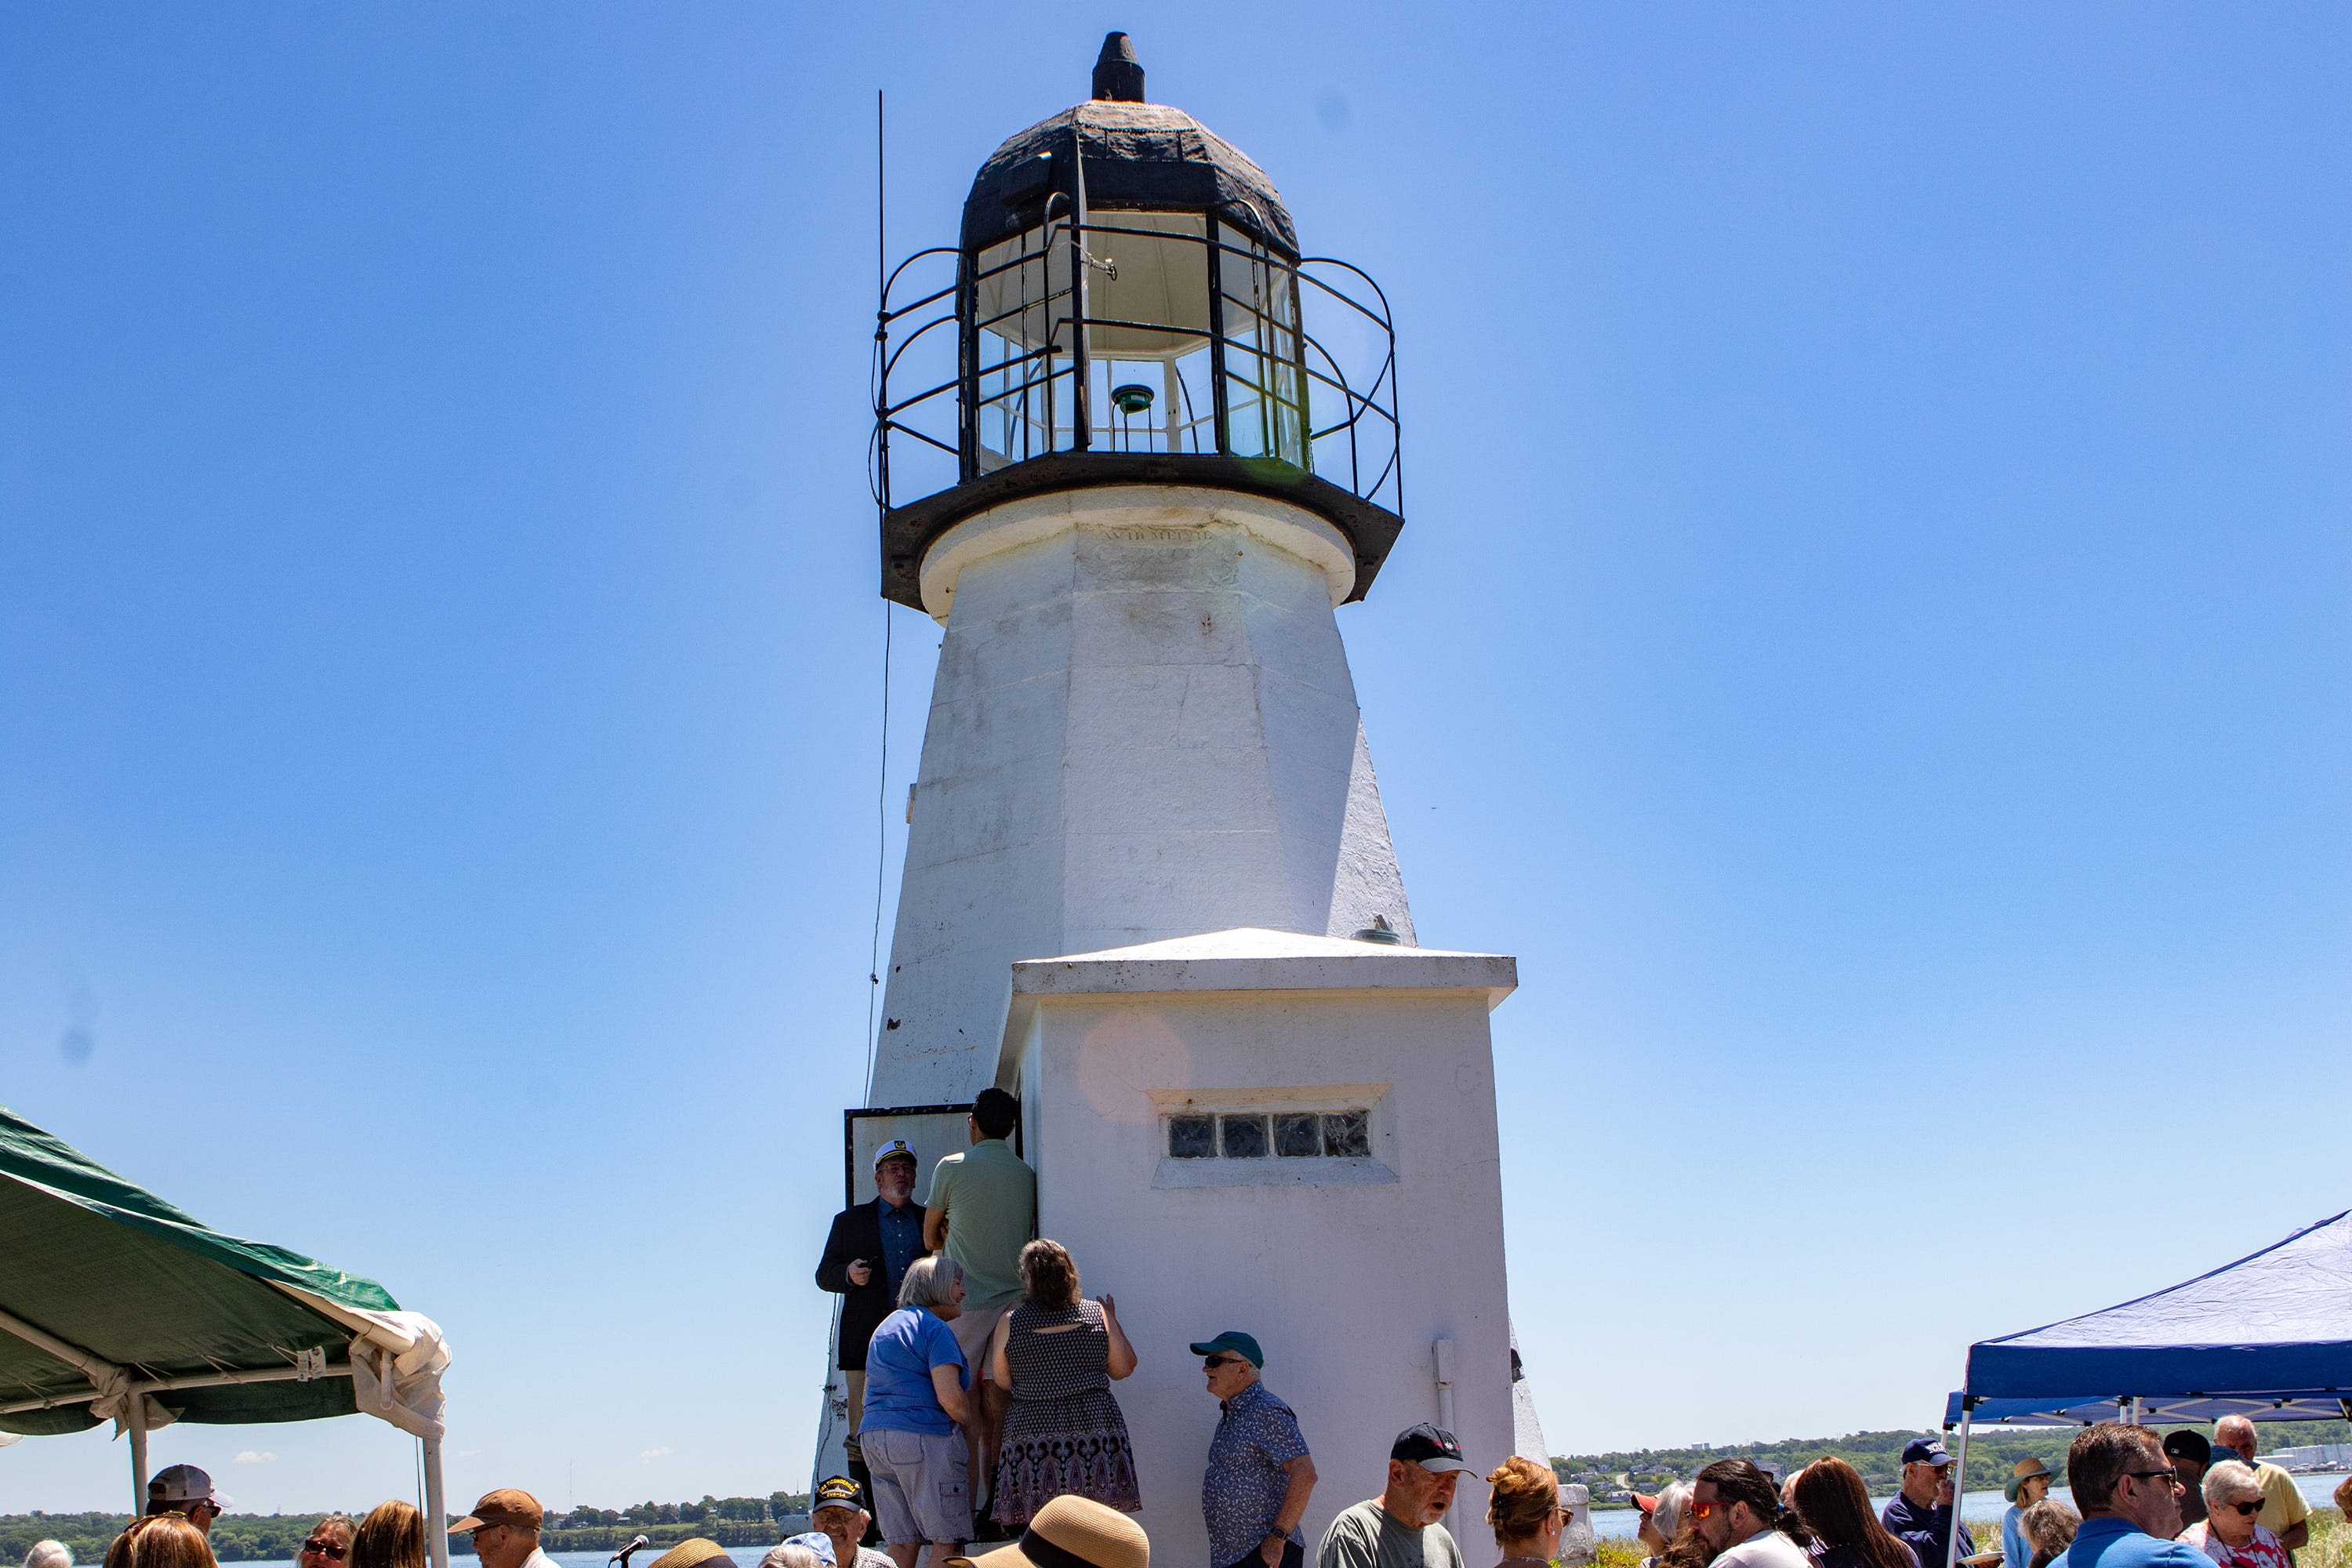 The oldest lighthouse in RI has changed hands. Here's what to know about it.